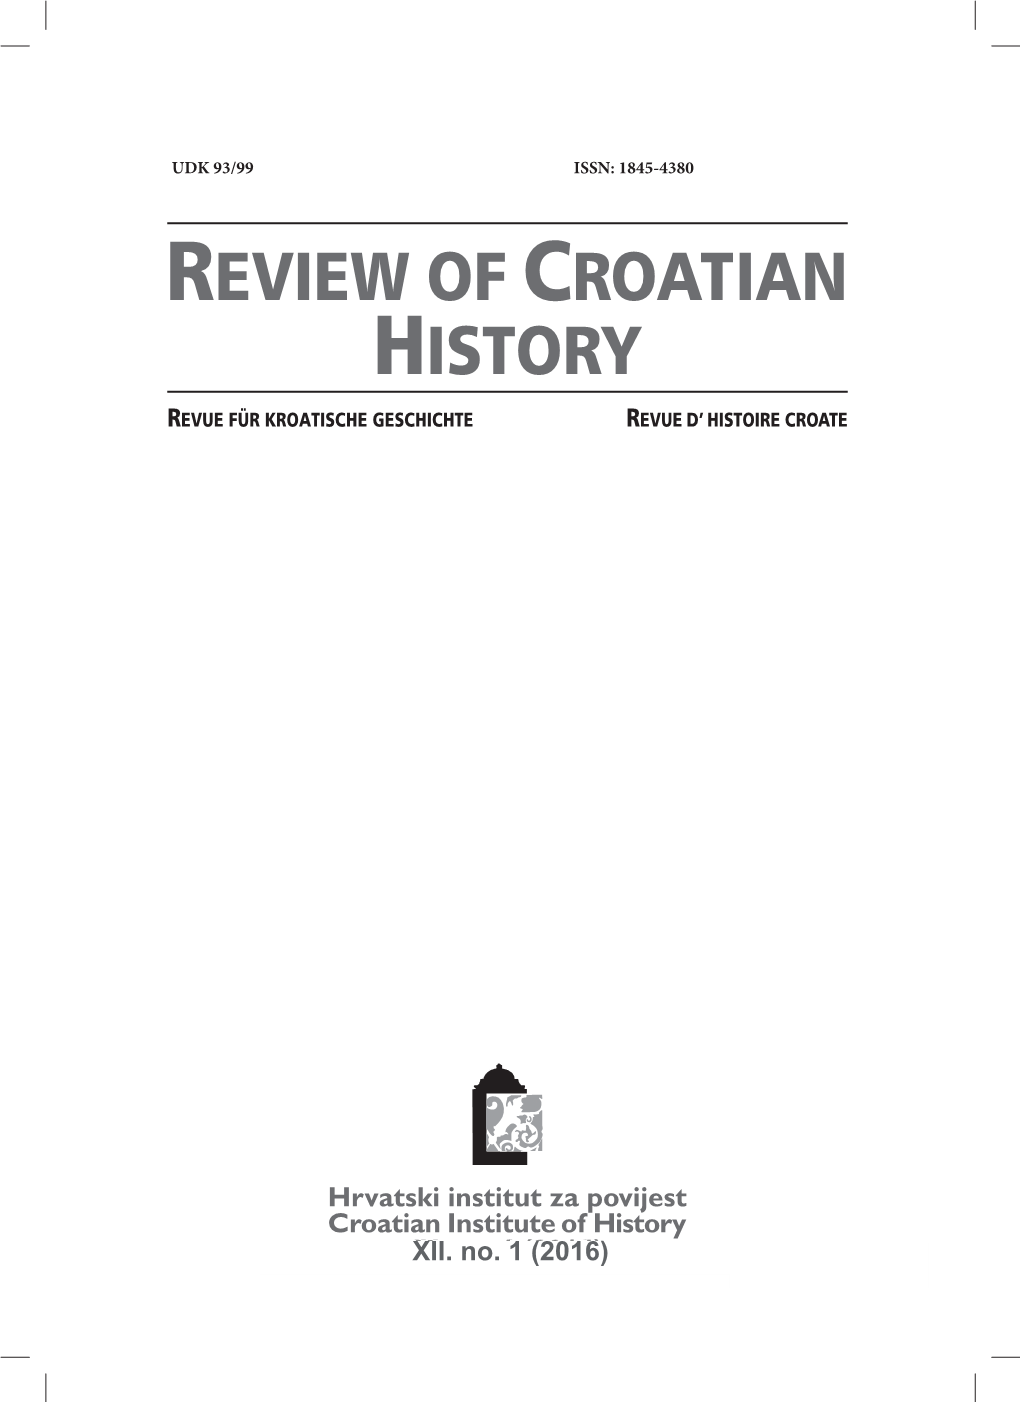 Review of Croatian History